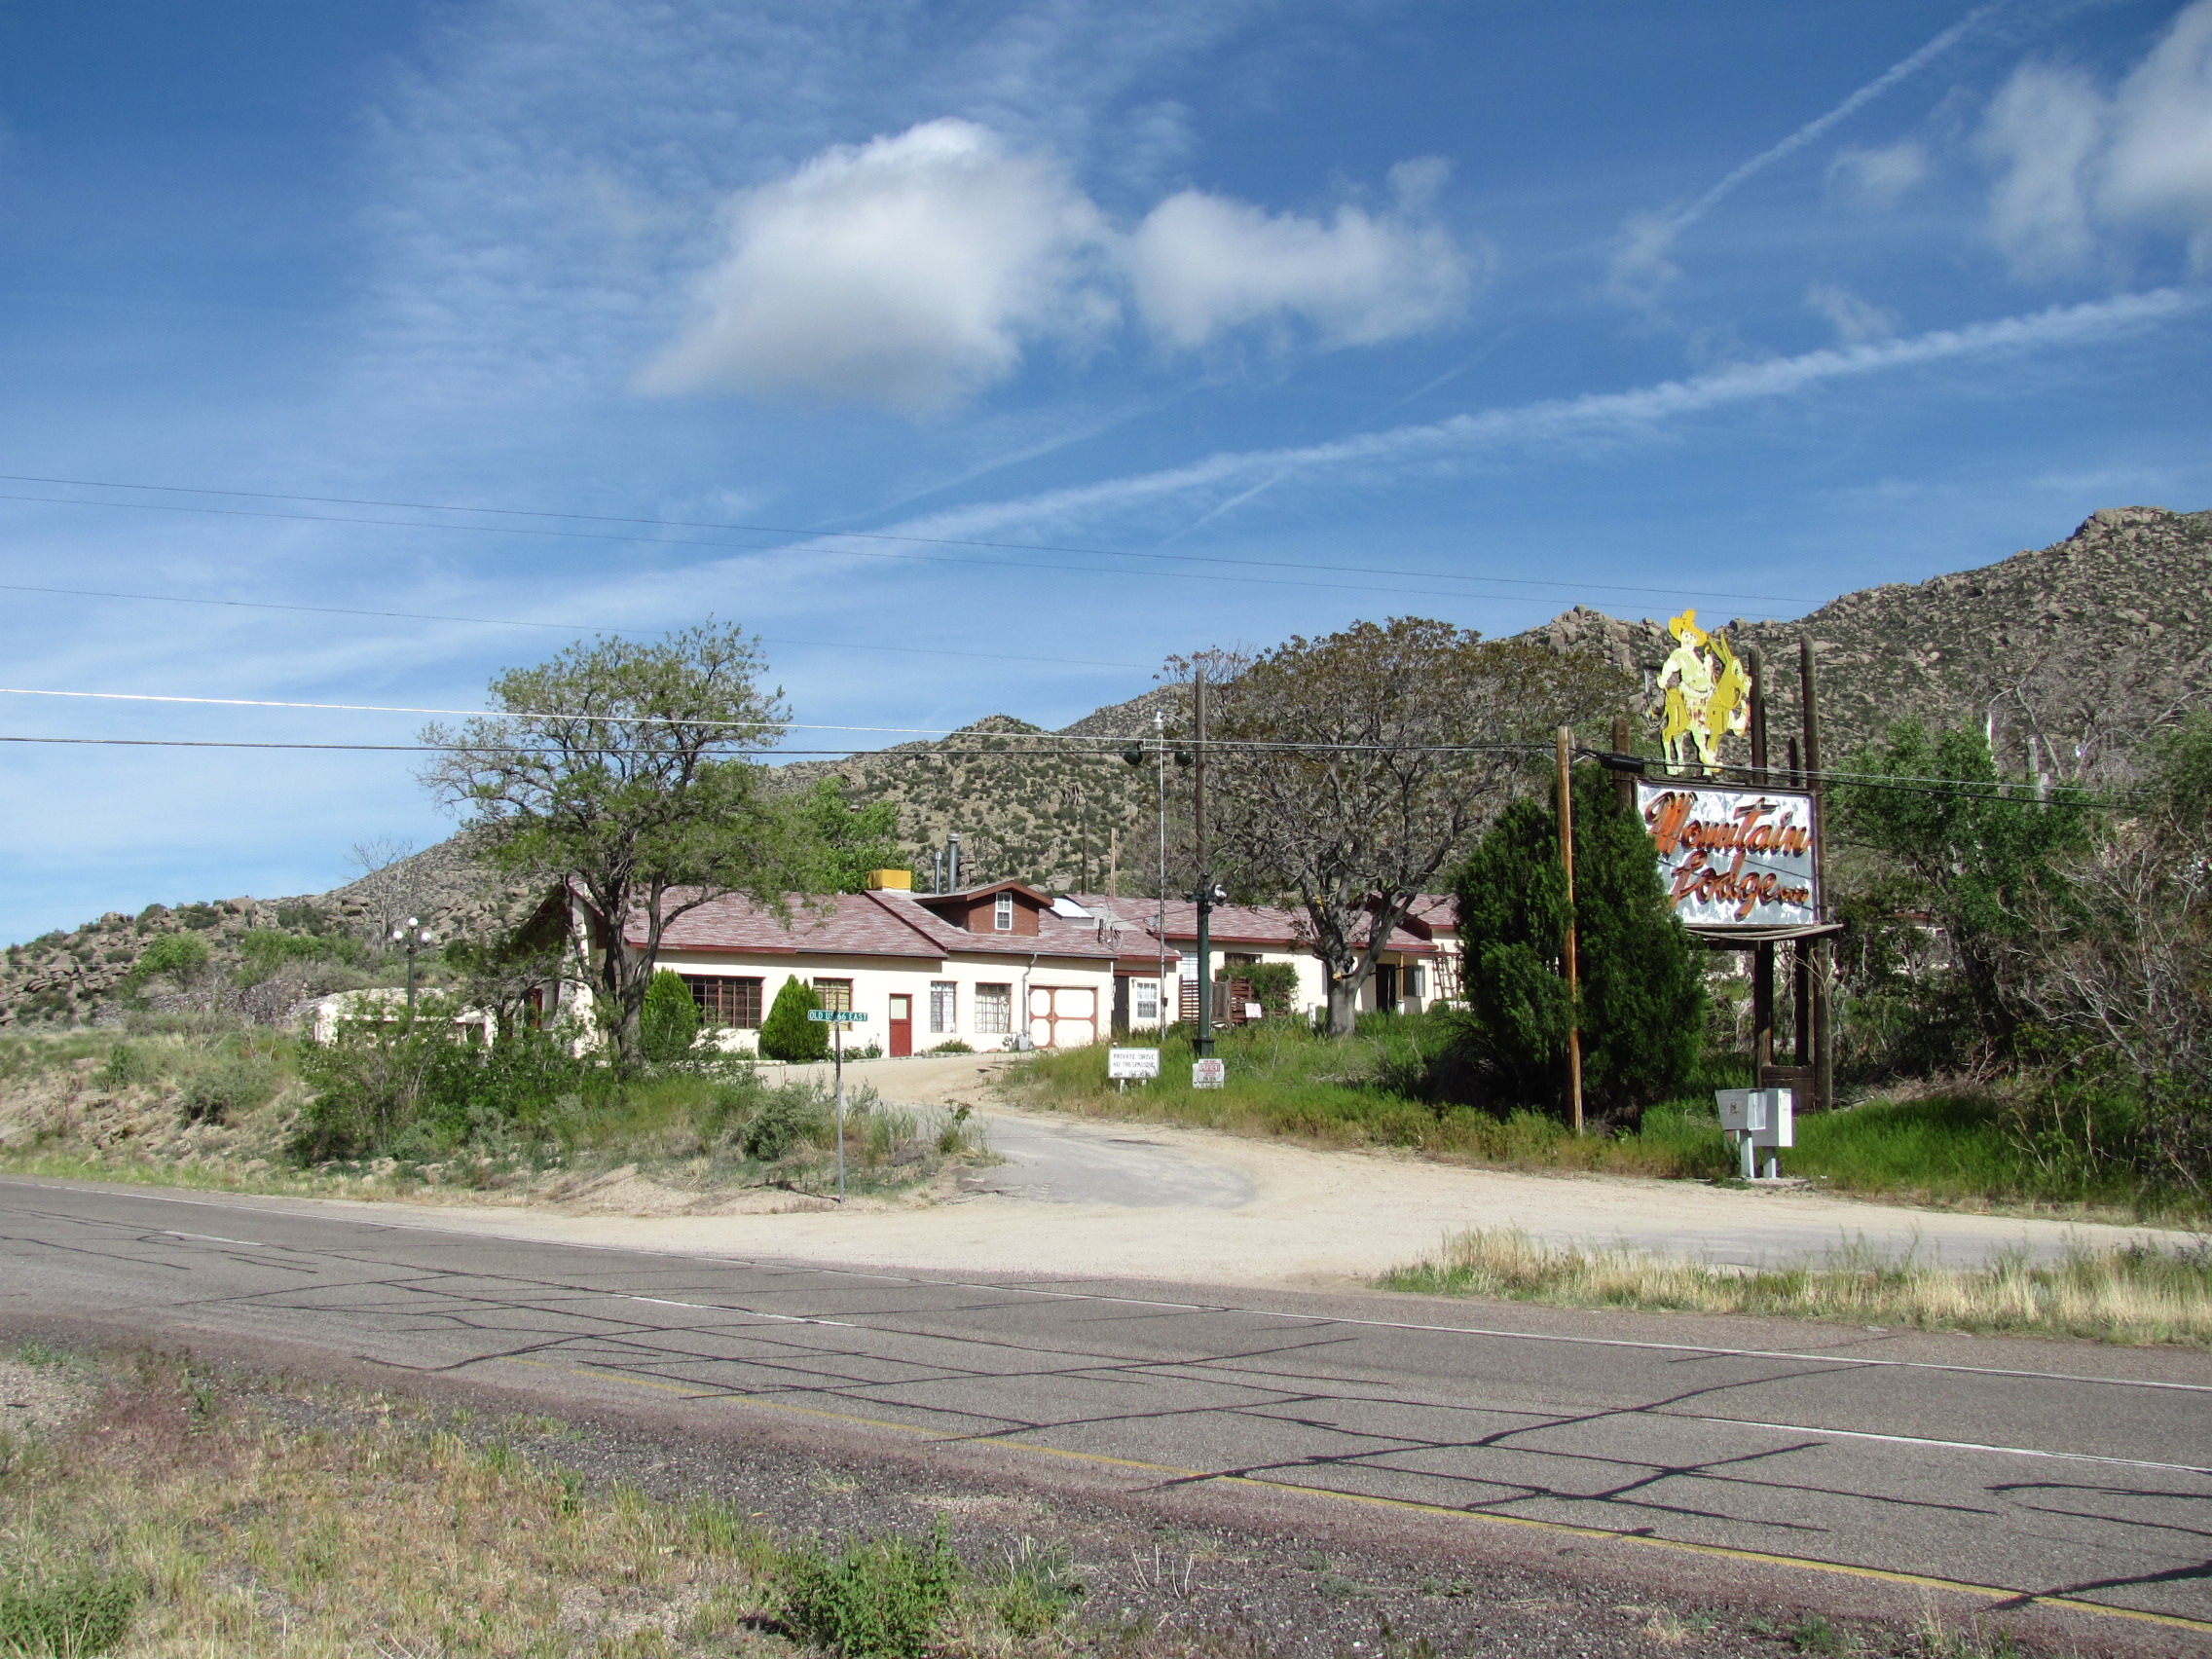 File:Old Mountain Lodge on Old Route 66, Carnuel NM.jpg - Wikimedia ...